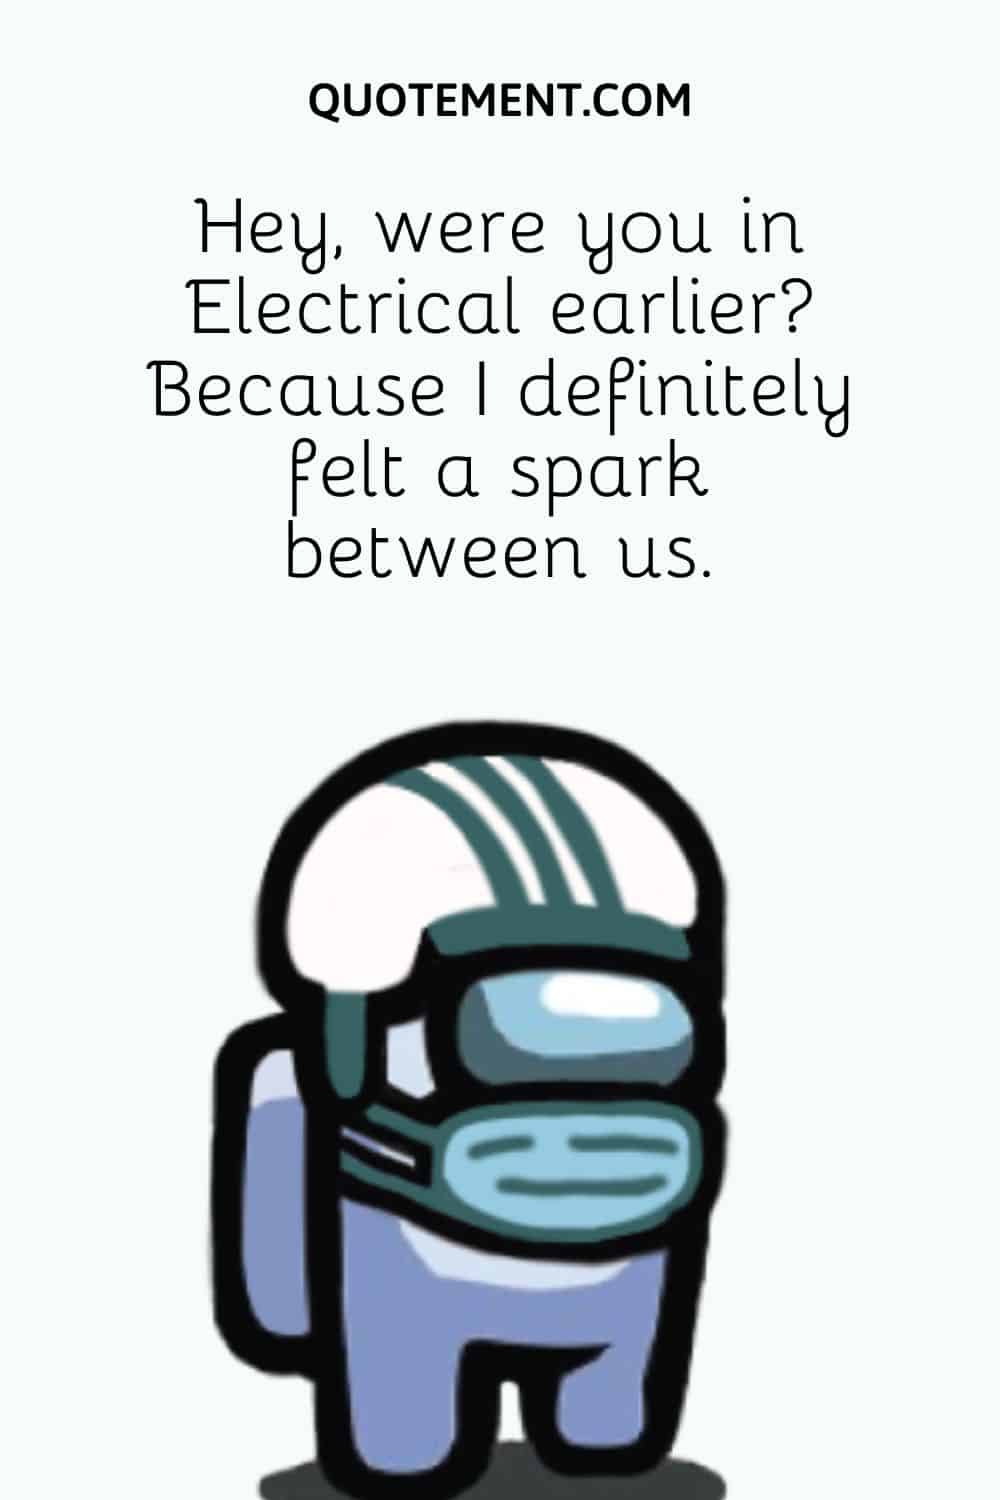 Hey, were you in Electrical earlier Because I definitely felt a spark between us.